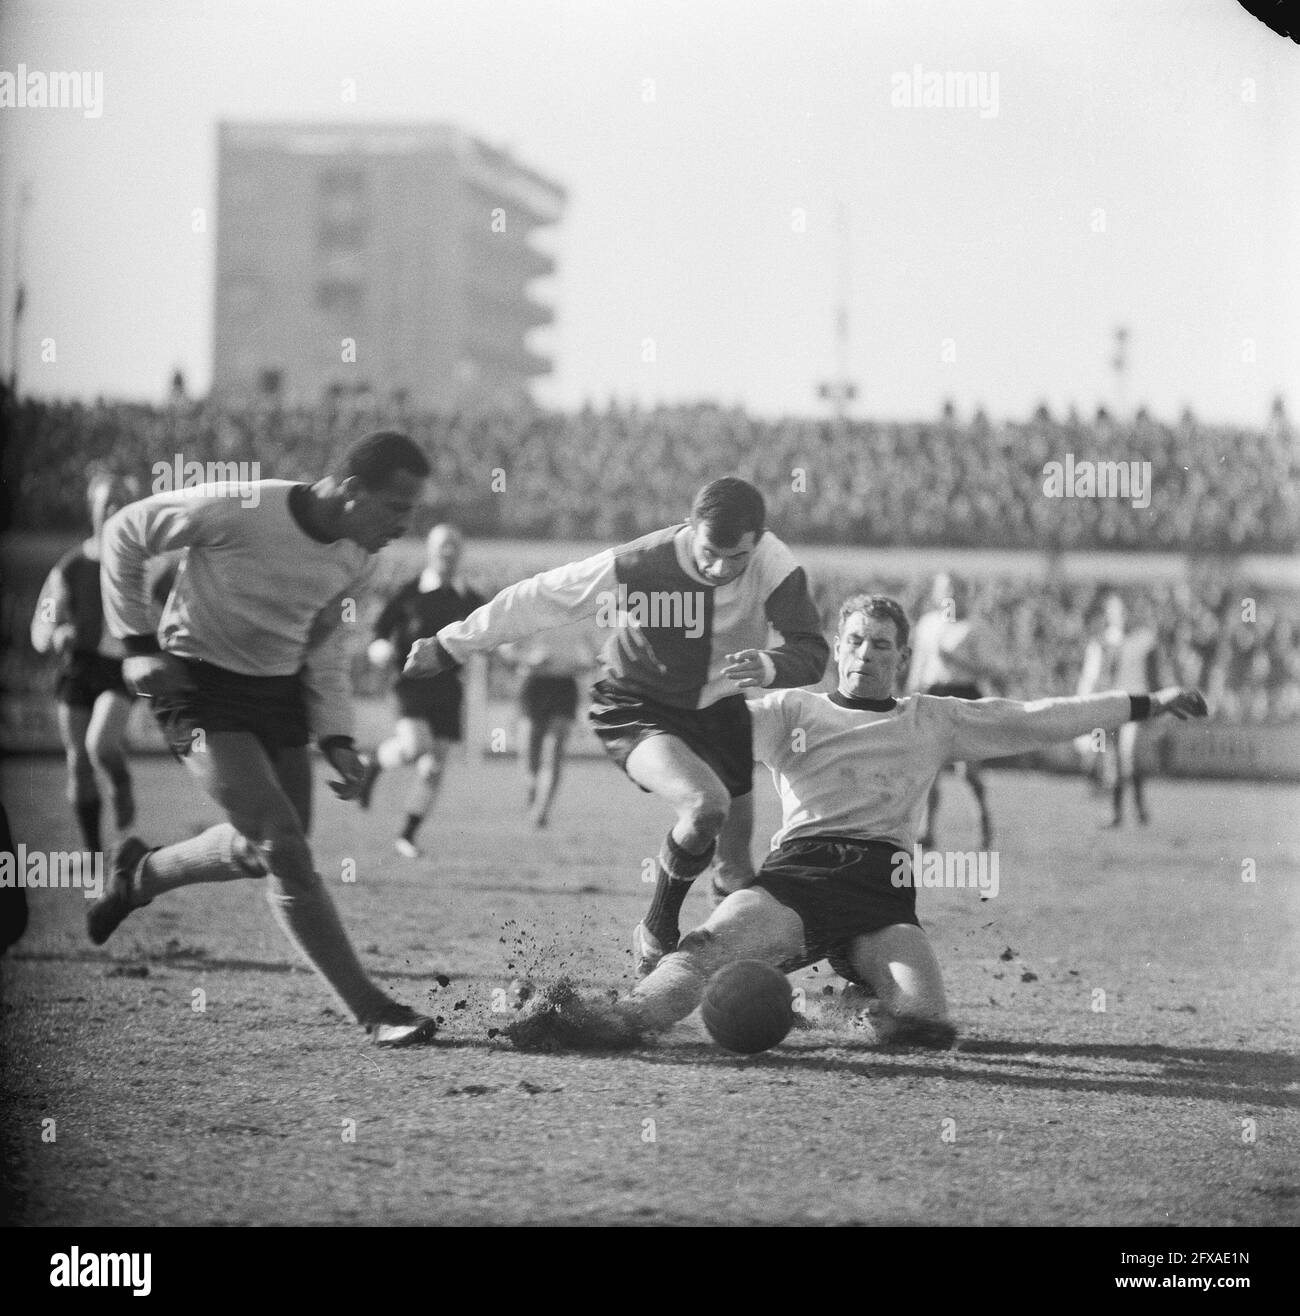 DOS against Feyenoord, Mijnals, Coen Moulijn, Van Plateringen, March 8, 1964, sports, soccer, The Netherlands, 20th century press agency photo, news to remember, documentary, historic photography 1945-1990, visual stories, human history of the Twentieth Century, capturing moments in time Stock Photo